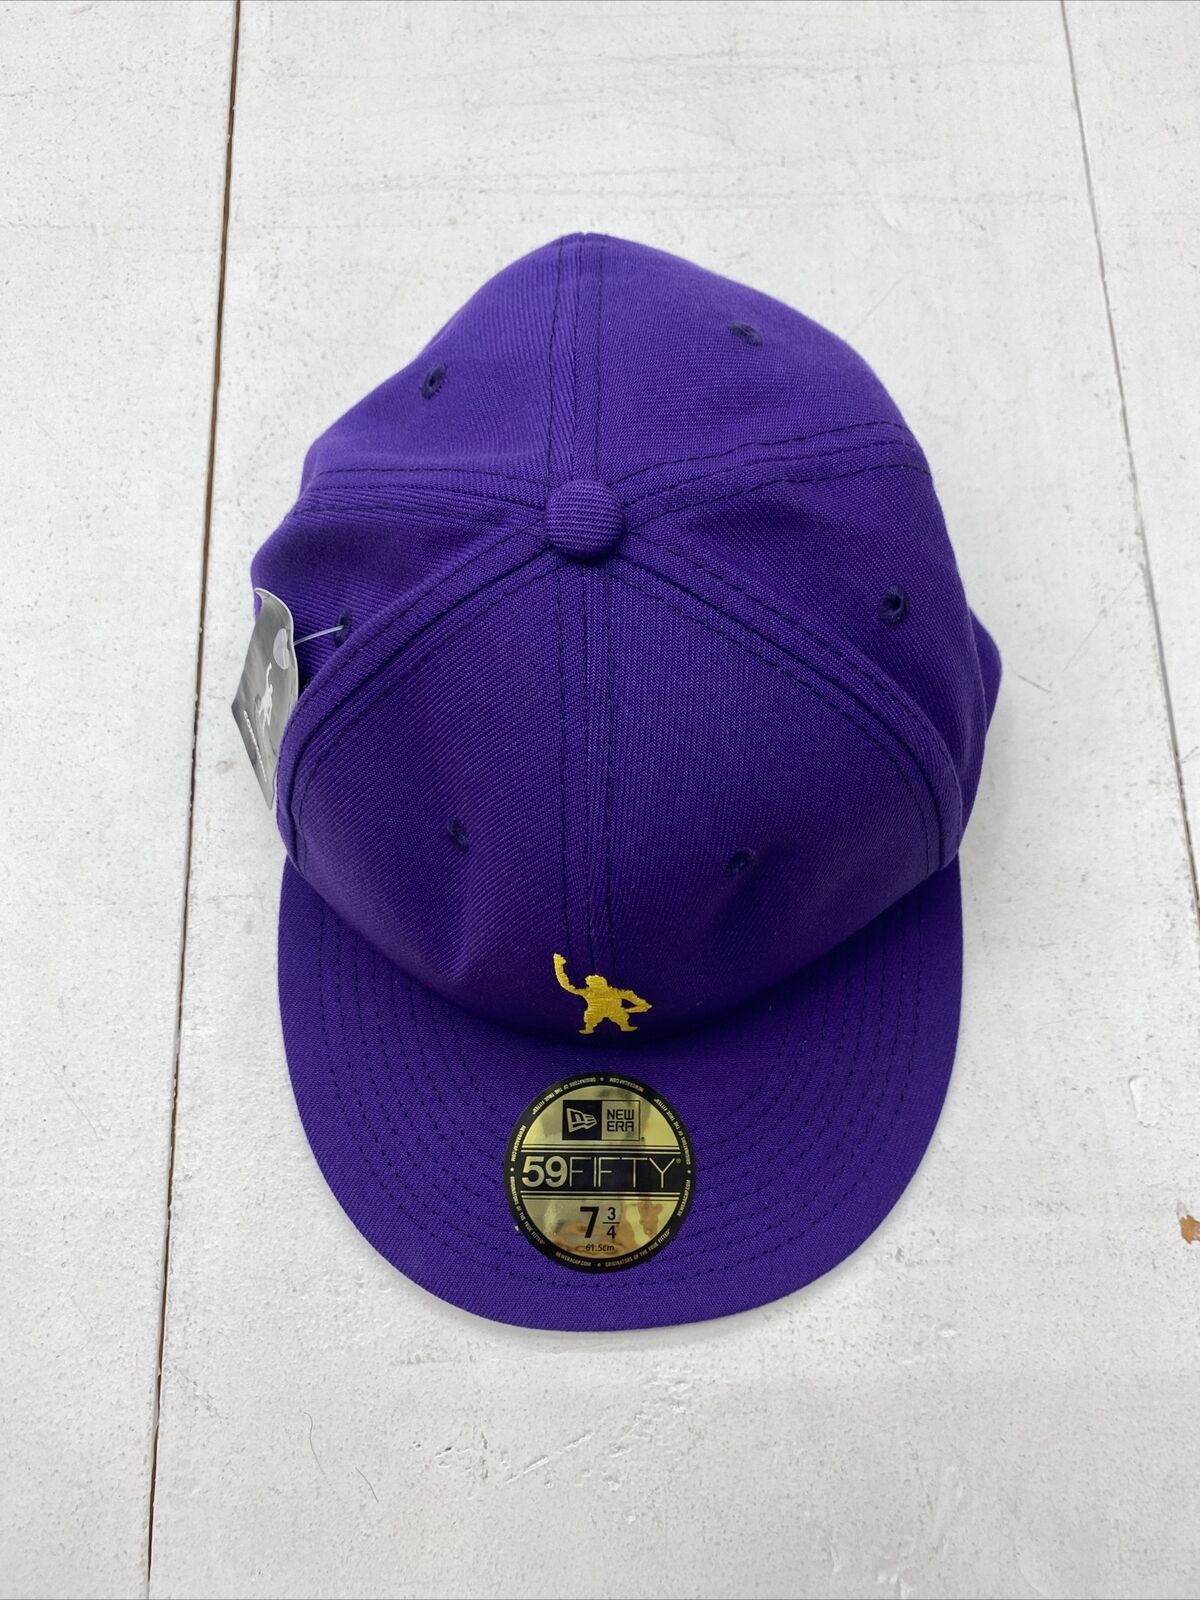 NWS Los Angeles Lakers 2021-22 City Edition New Era 59fifty 7 3/4 NBA